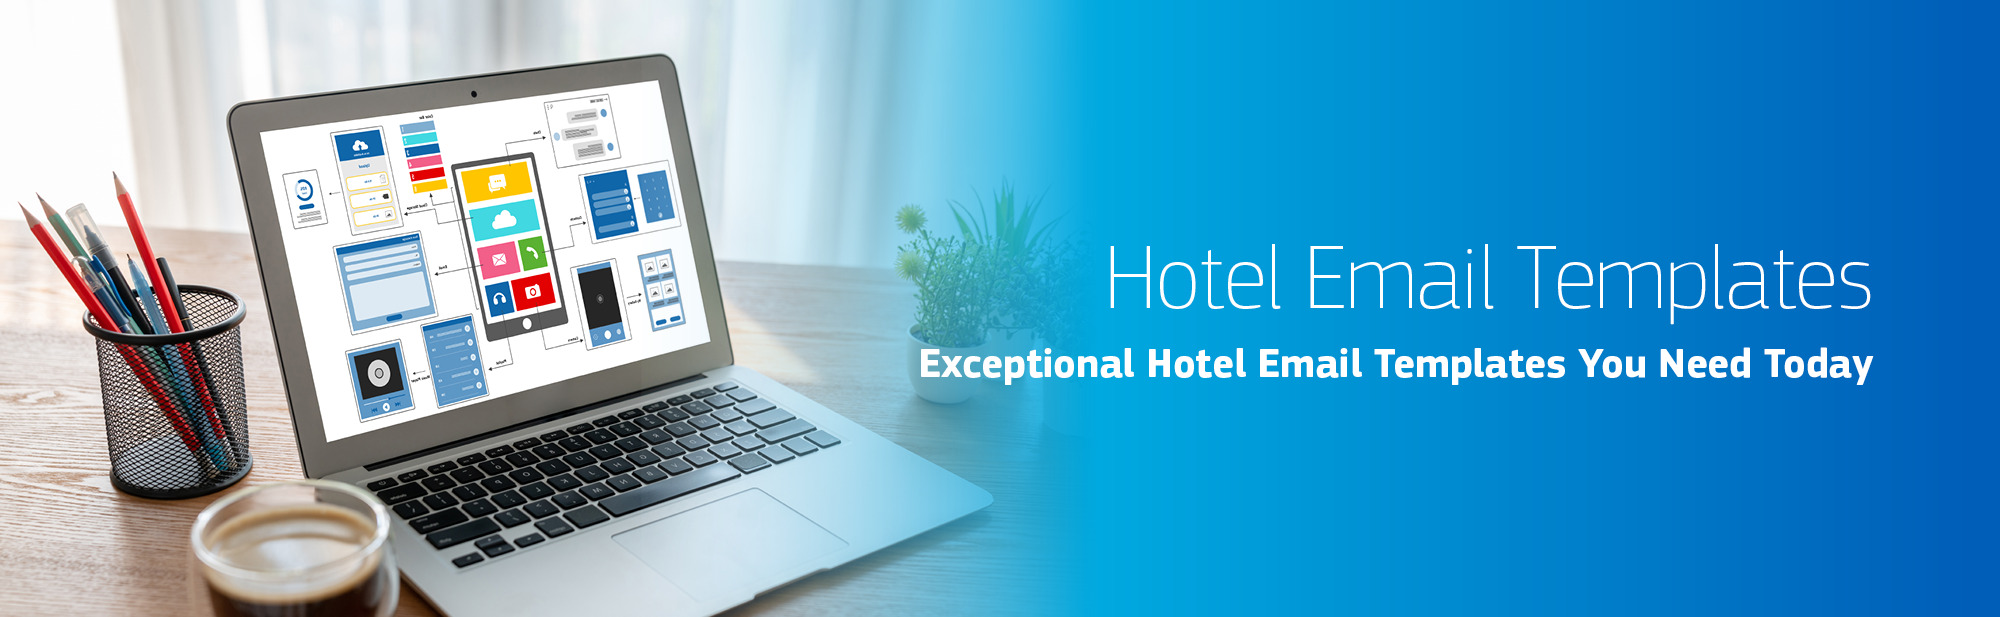 Hotel email templates